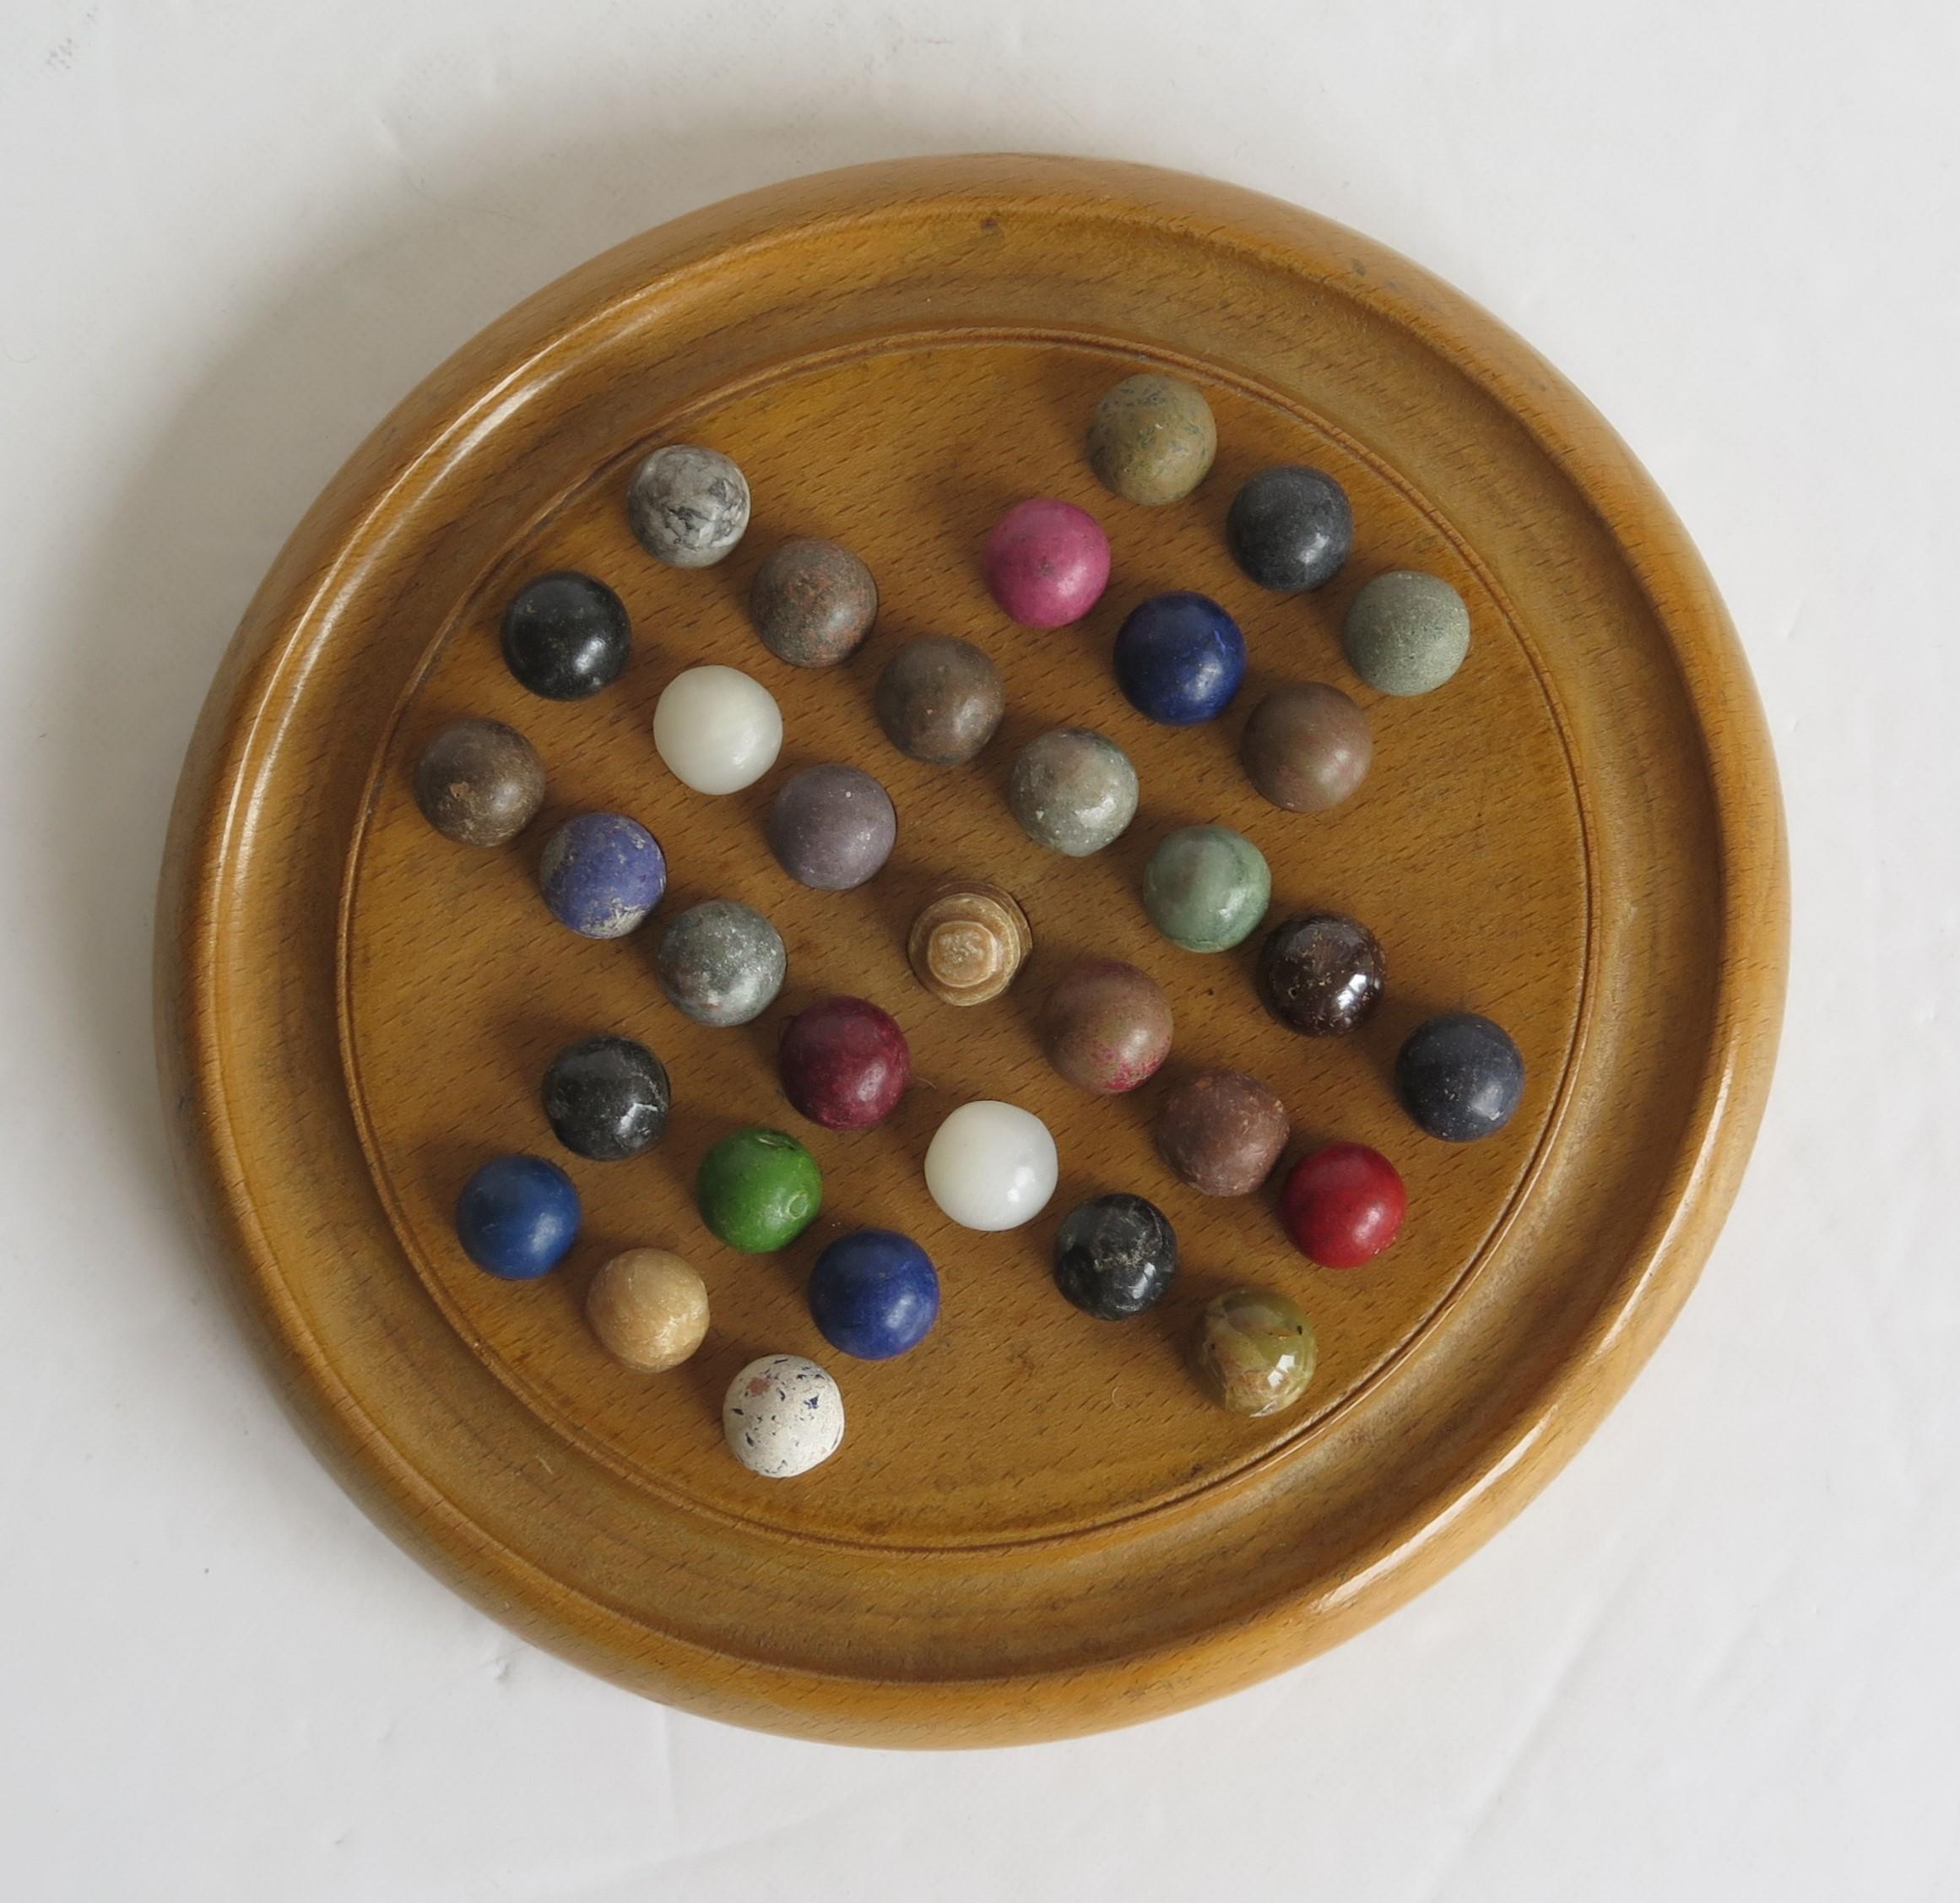 This is a complete game of marble solitaire from the late 19th century.

The circular turned board is made of a light coloured hardwood, probably Ash. The board has 32 equi-spaced holes with an additional one in the centre and a gallery to the